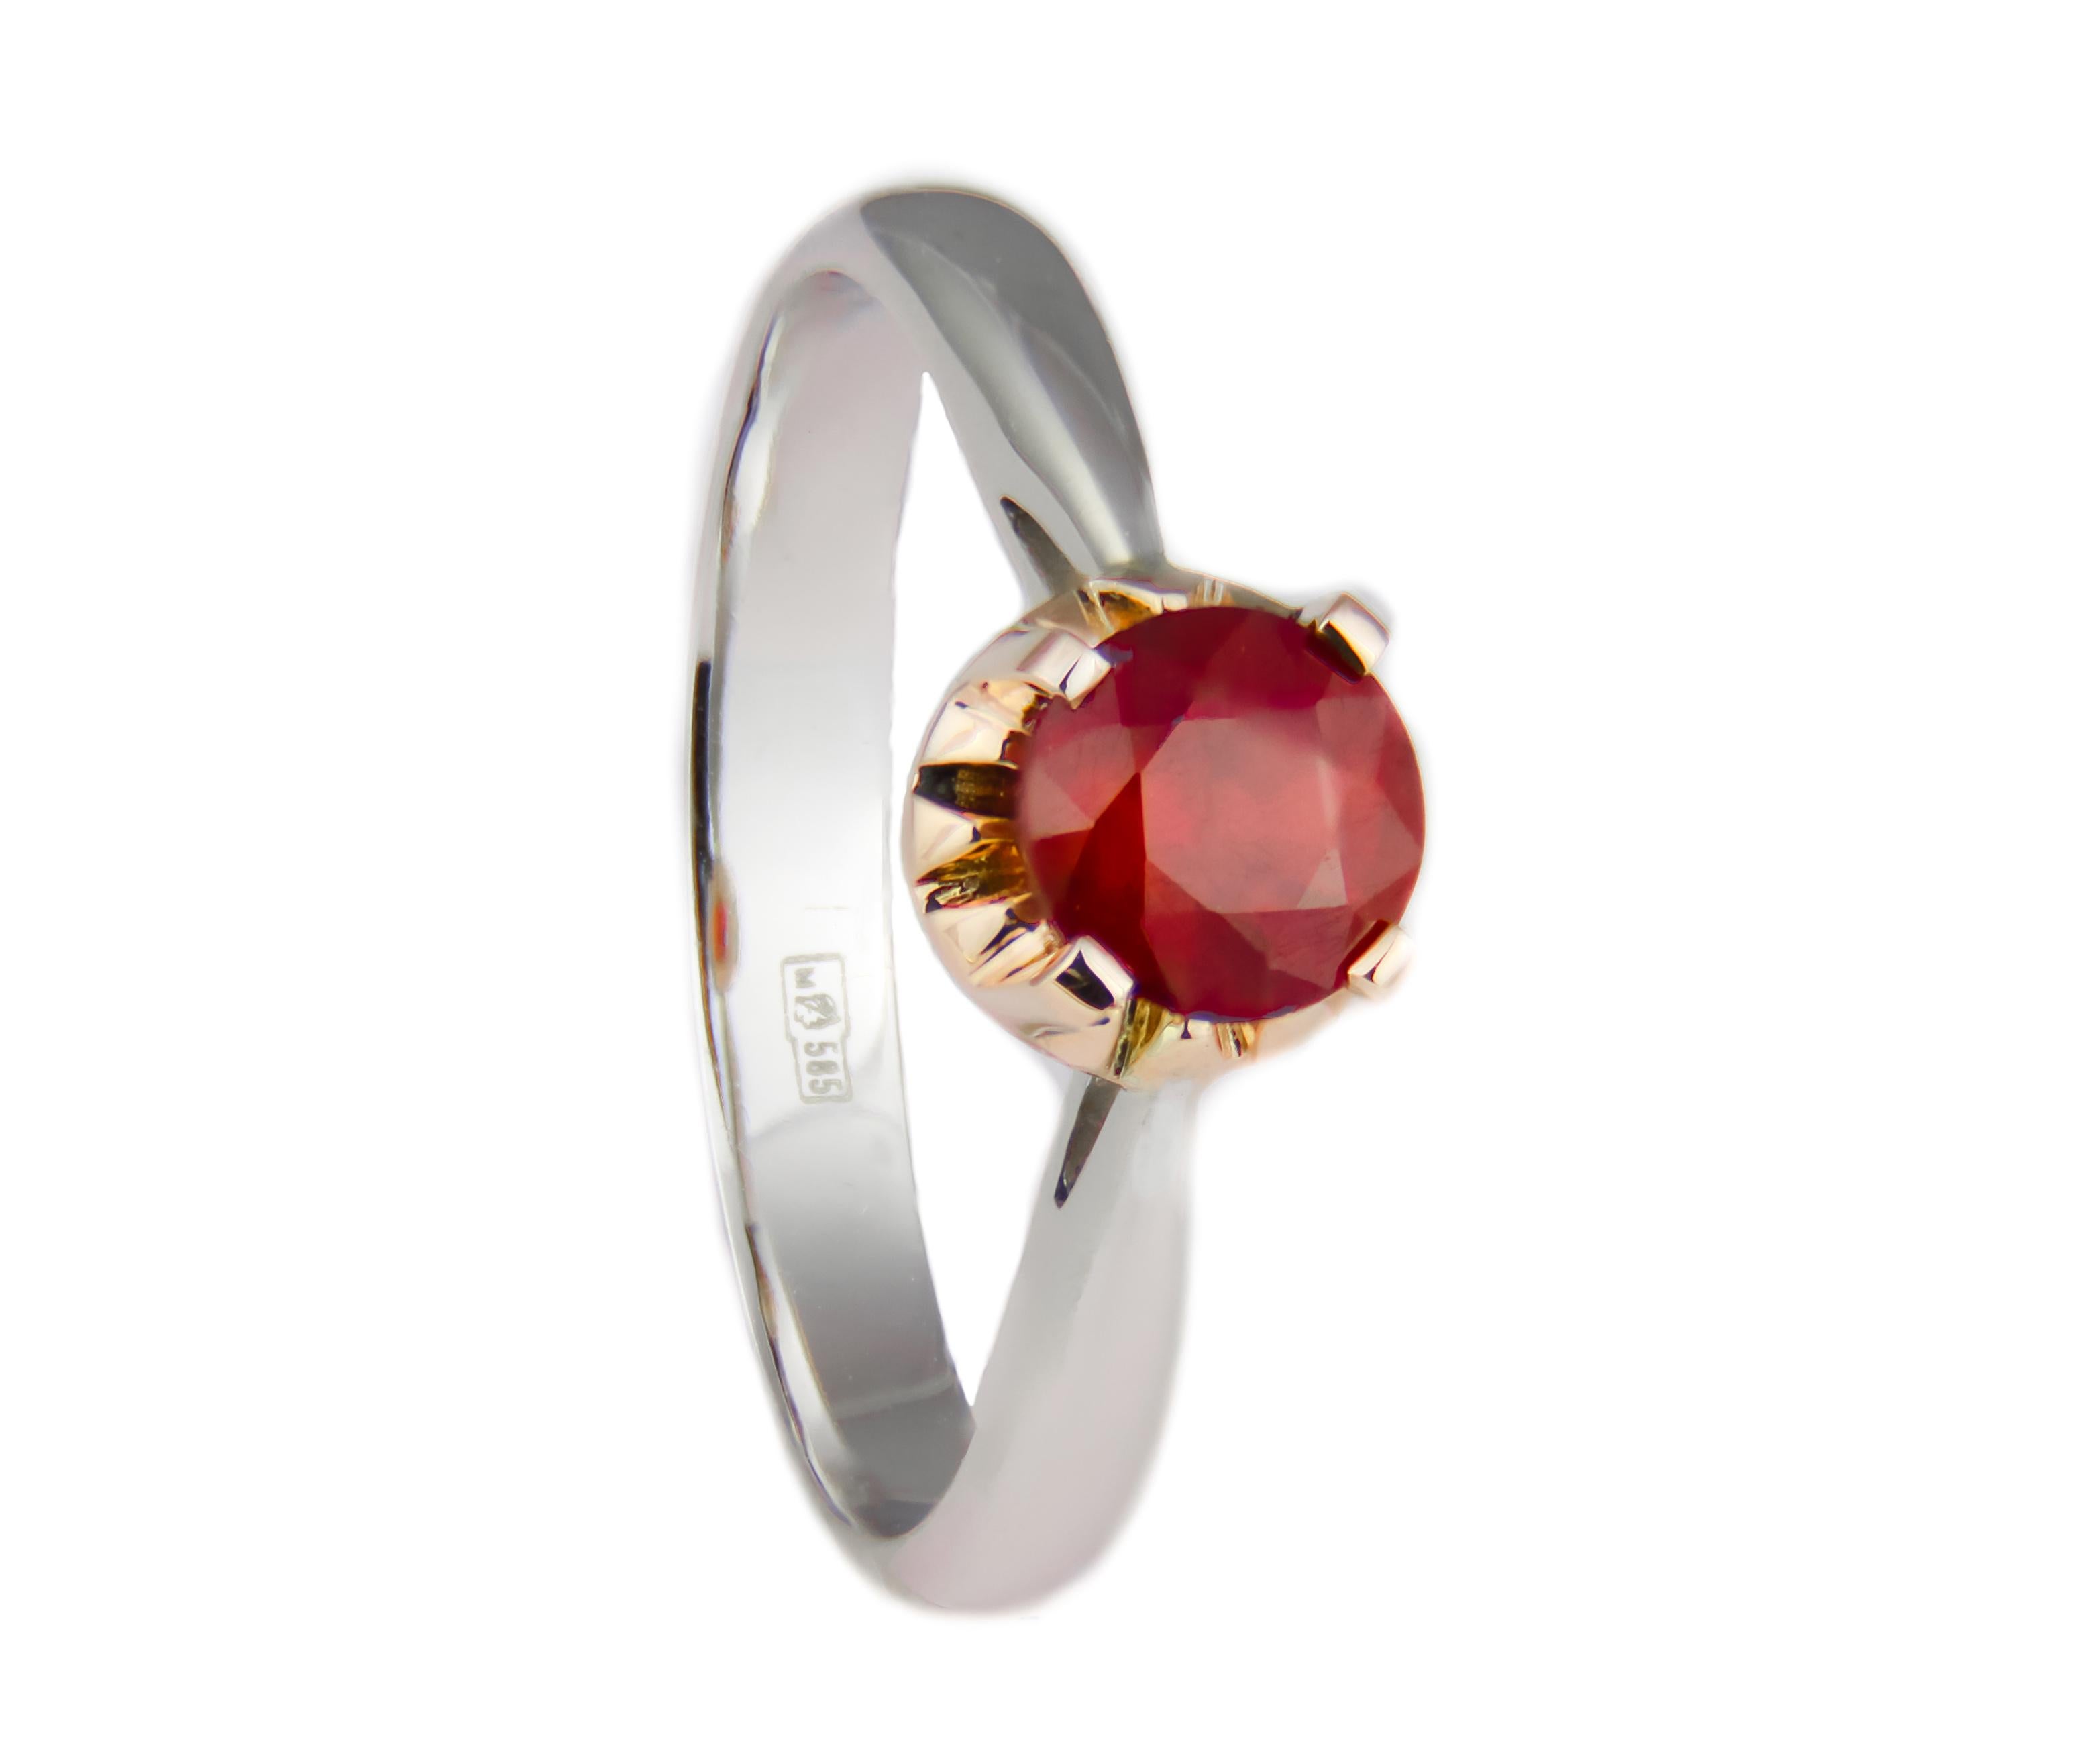 Ruby ring in 14k gold. 
Solitair ruby ring. Round ruby ring. Ruby gold ring. Ruby engagement ring. July birthstone ring. Genuine ruby ring.

Metal: 14k solid gold. 2 color tone gold: white and yellow.
Weight approx. 2.1 g. - depends of choosen